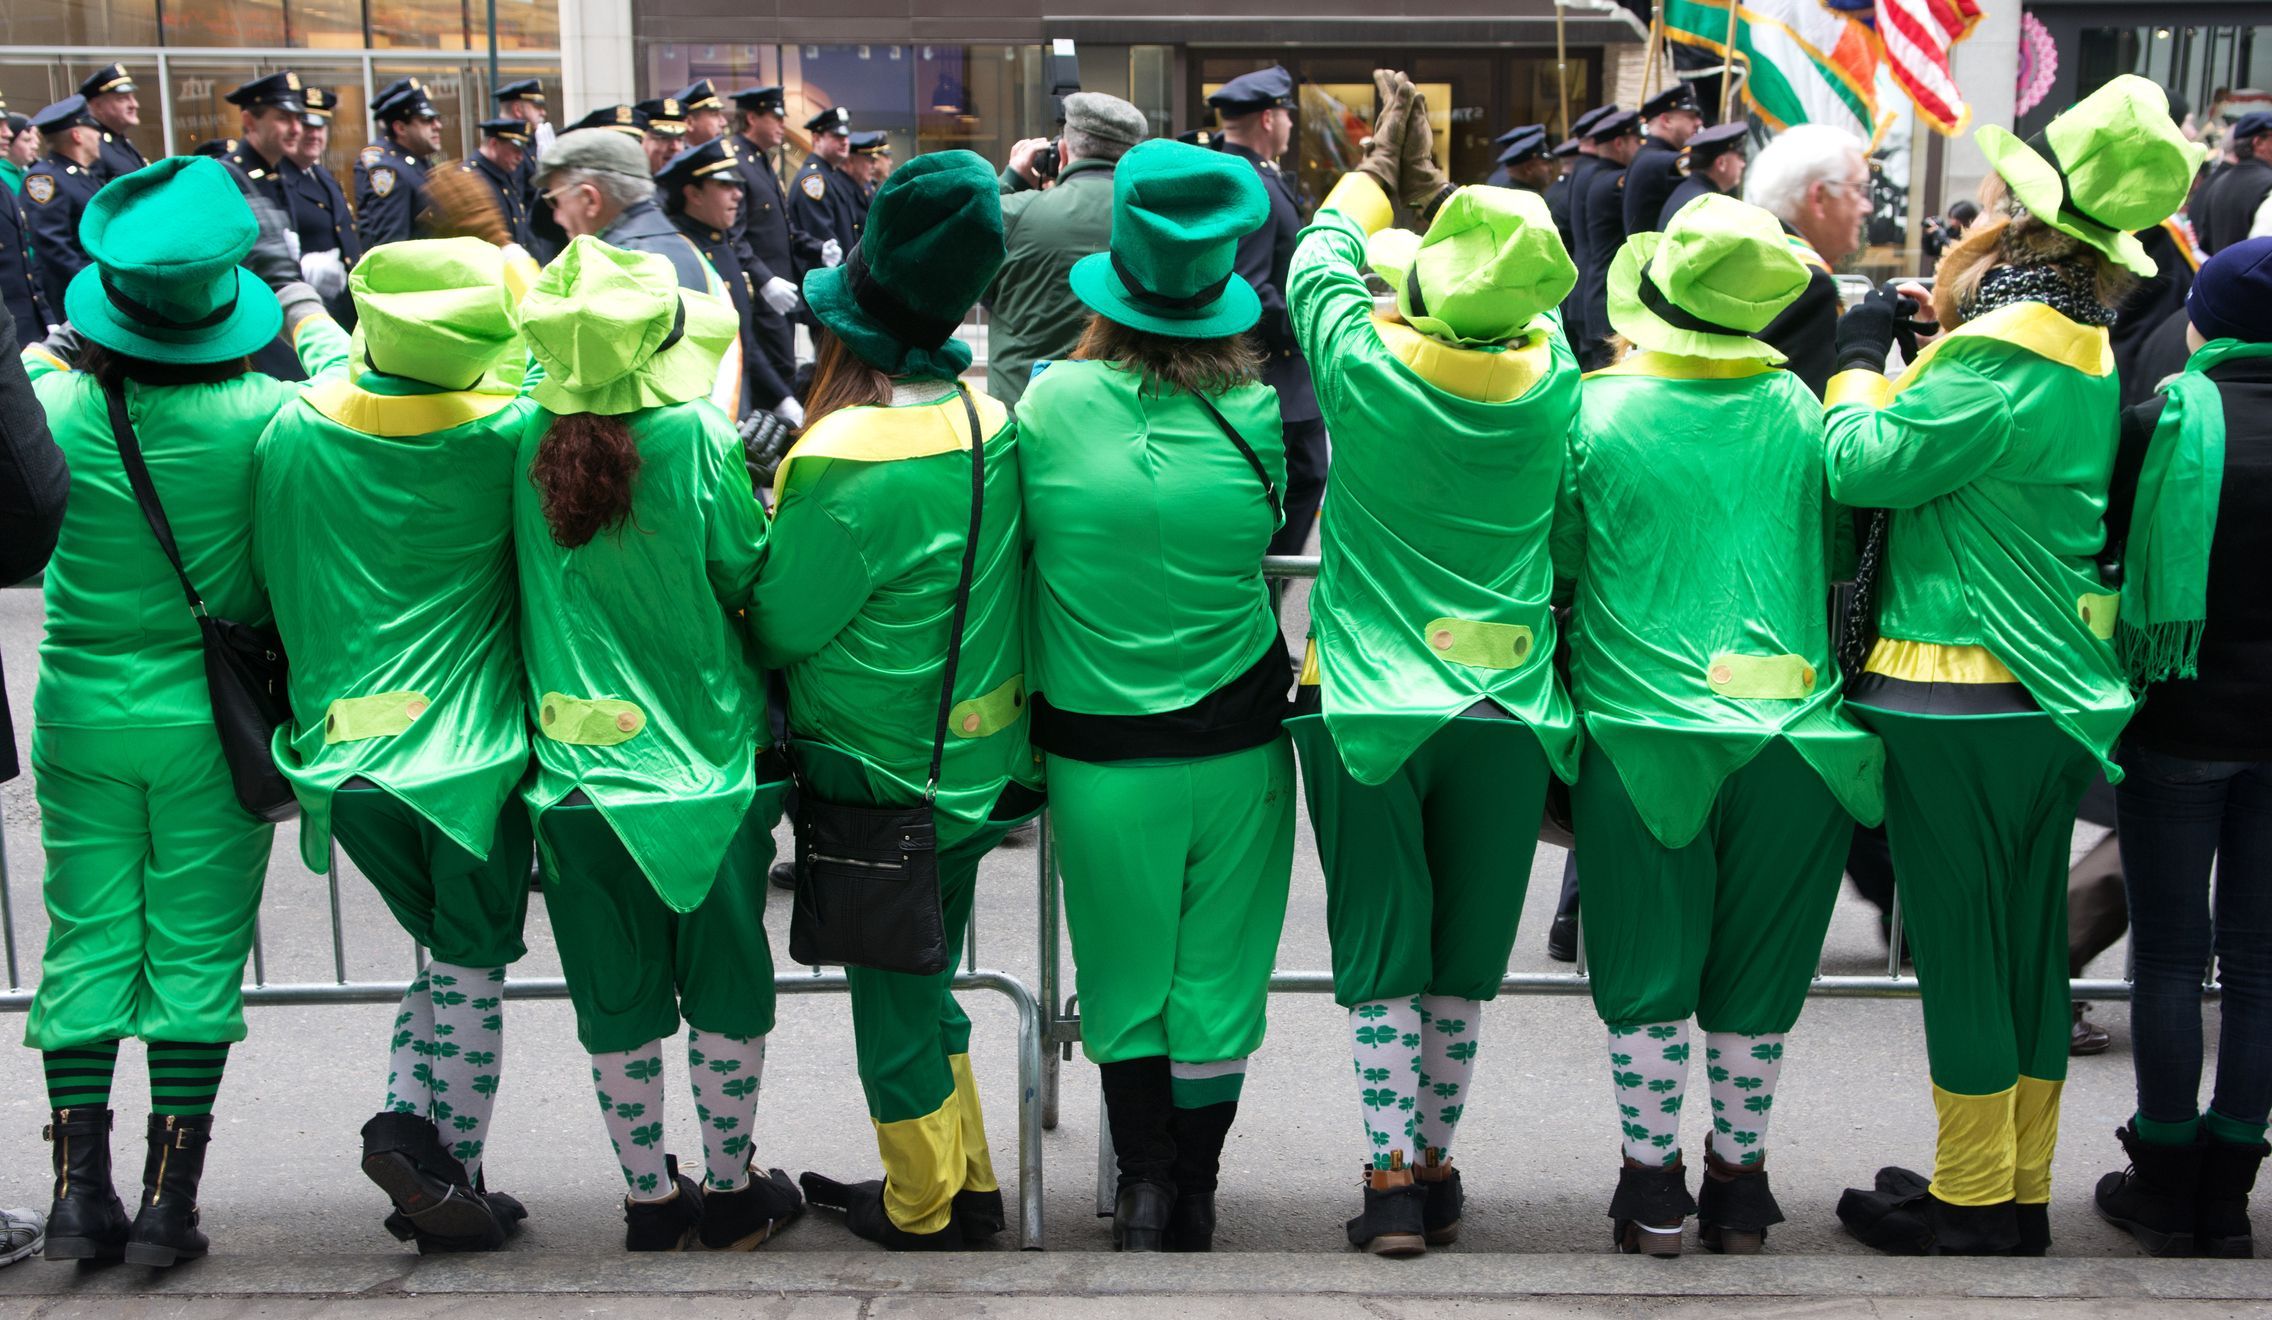 Who was first to wear green St. Patrick's Day uniforms?